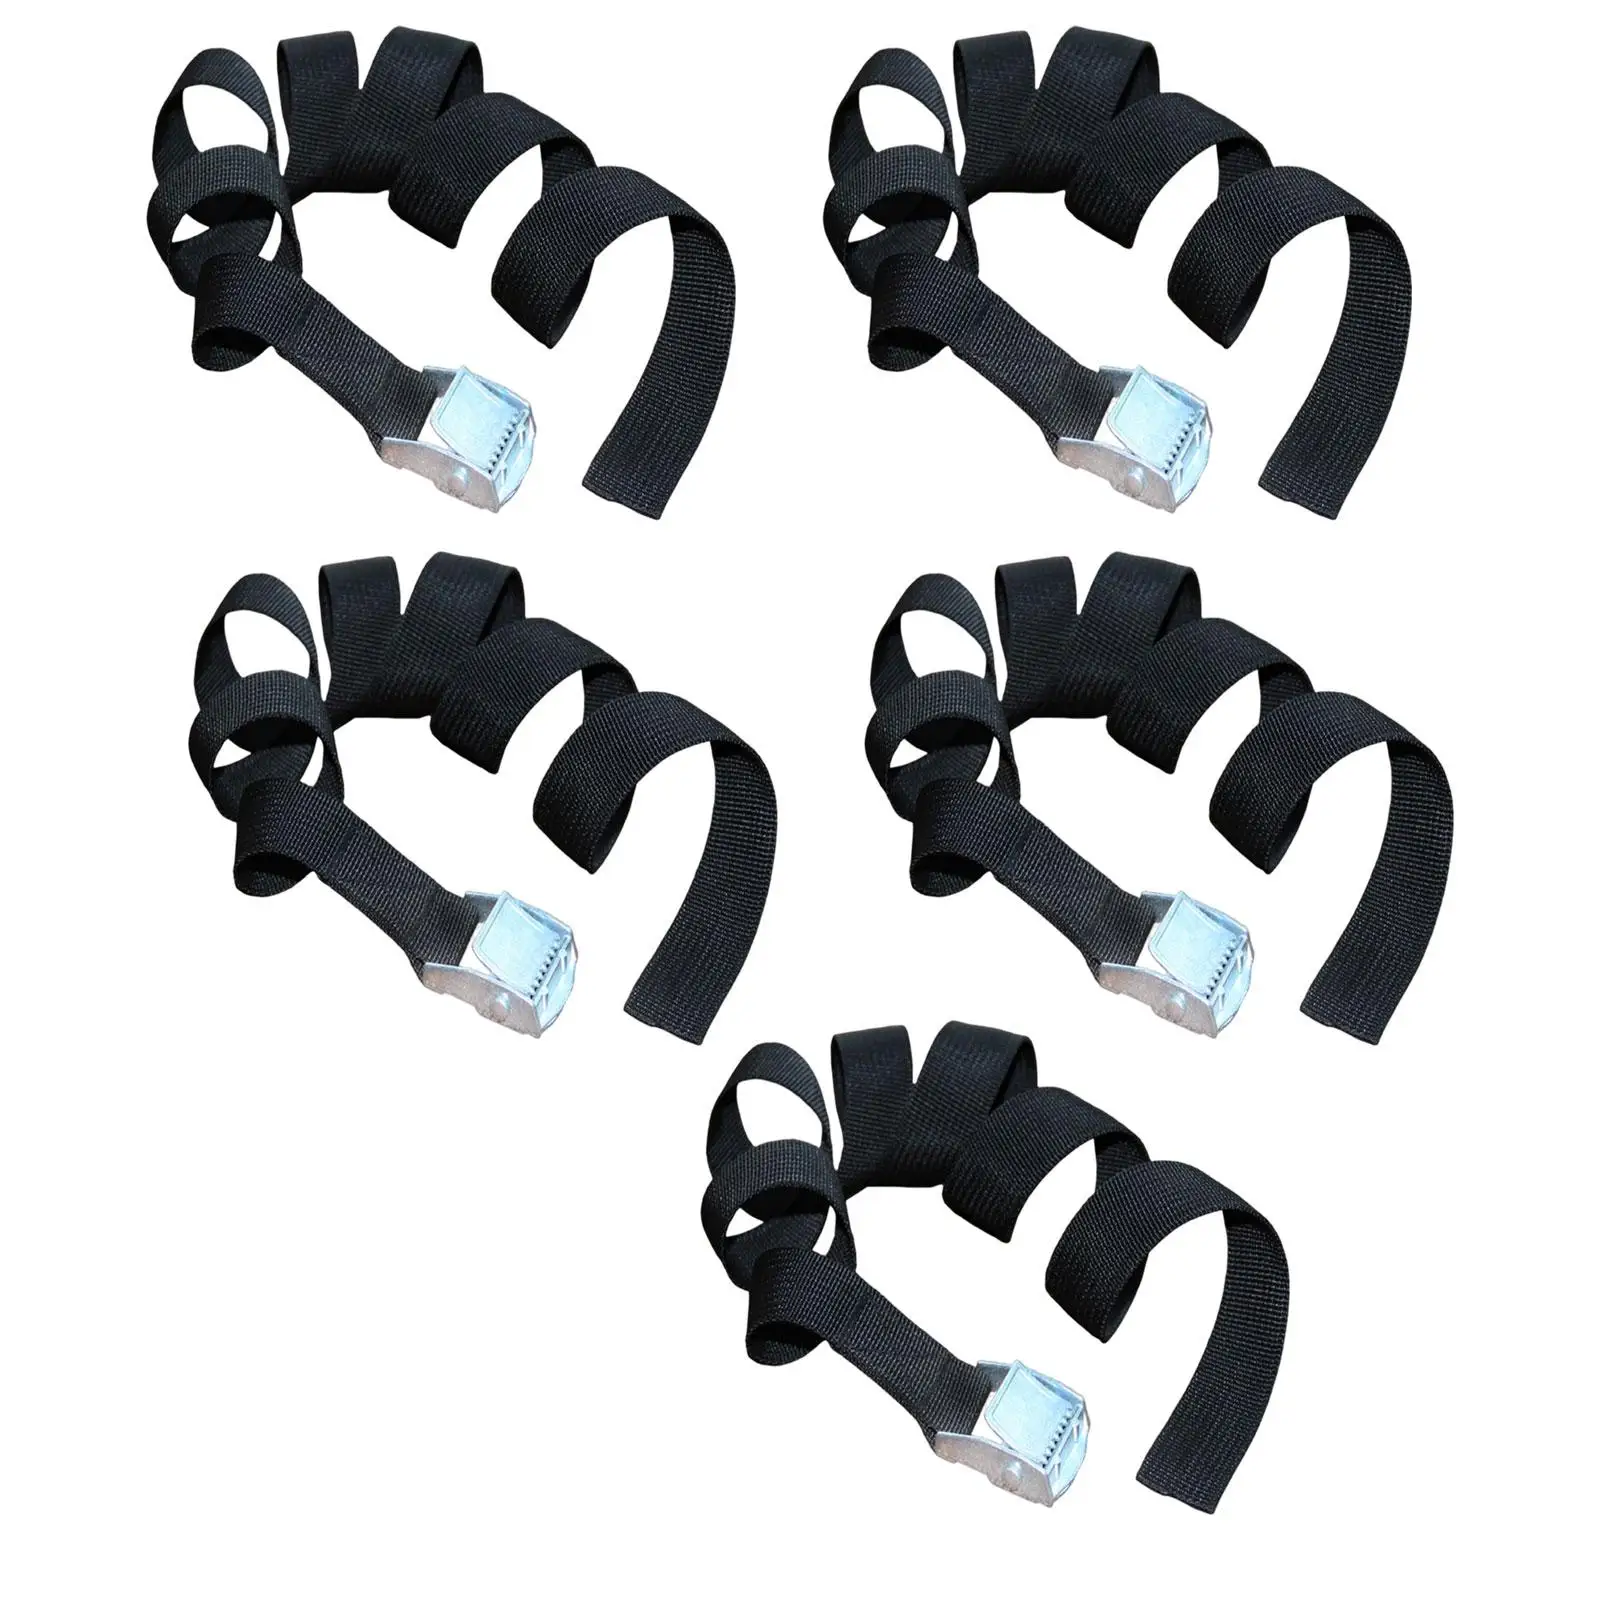 5 Pieces Tie Down Straps with Zinc Alloy Lock Buckle Lashing Strap Fixed Cargo